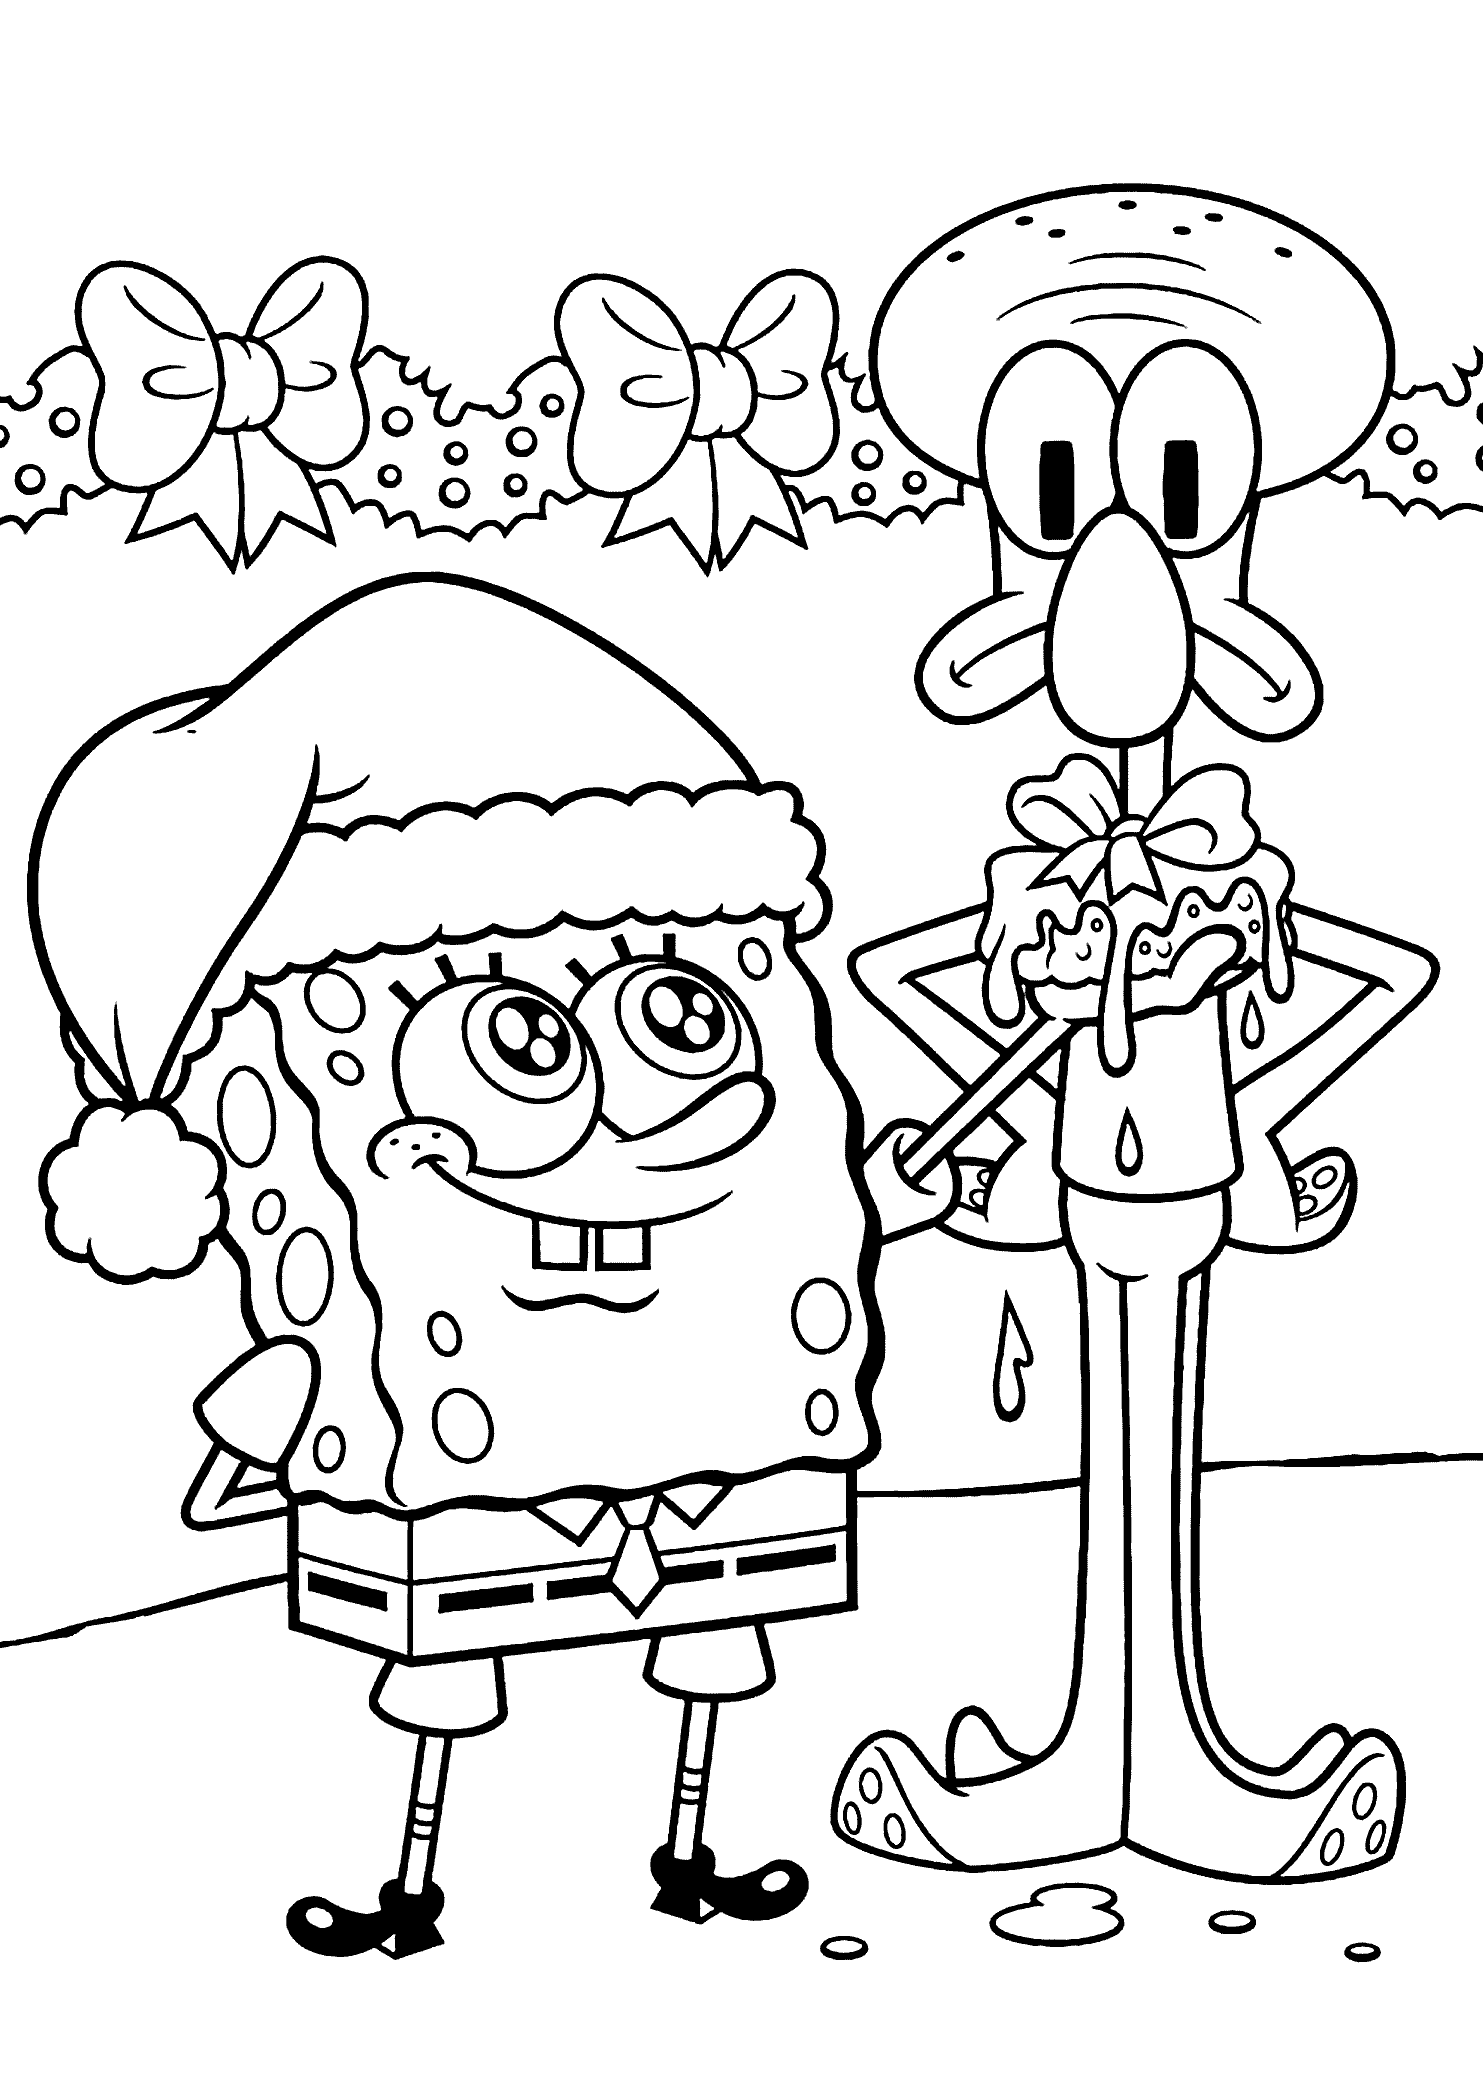 Spongebob Christmas Coloring Pages Free Printable   Coloring Home